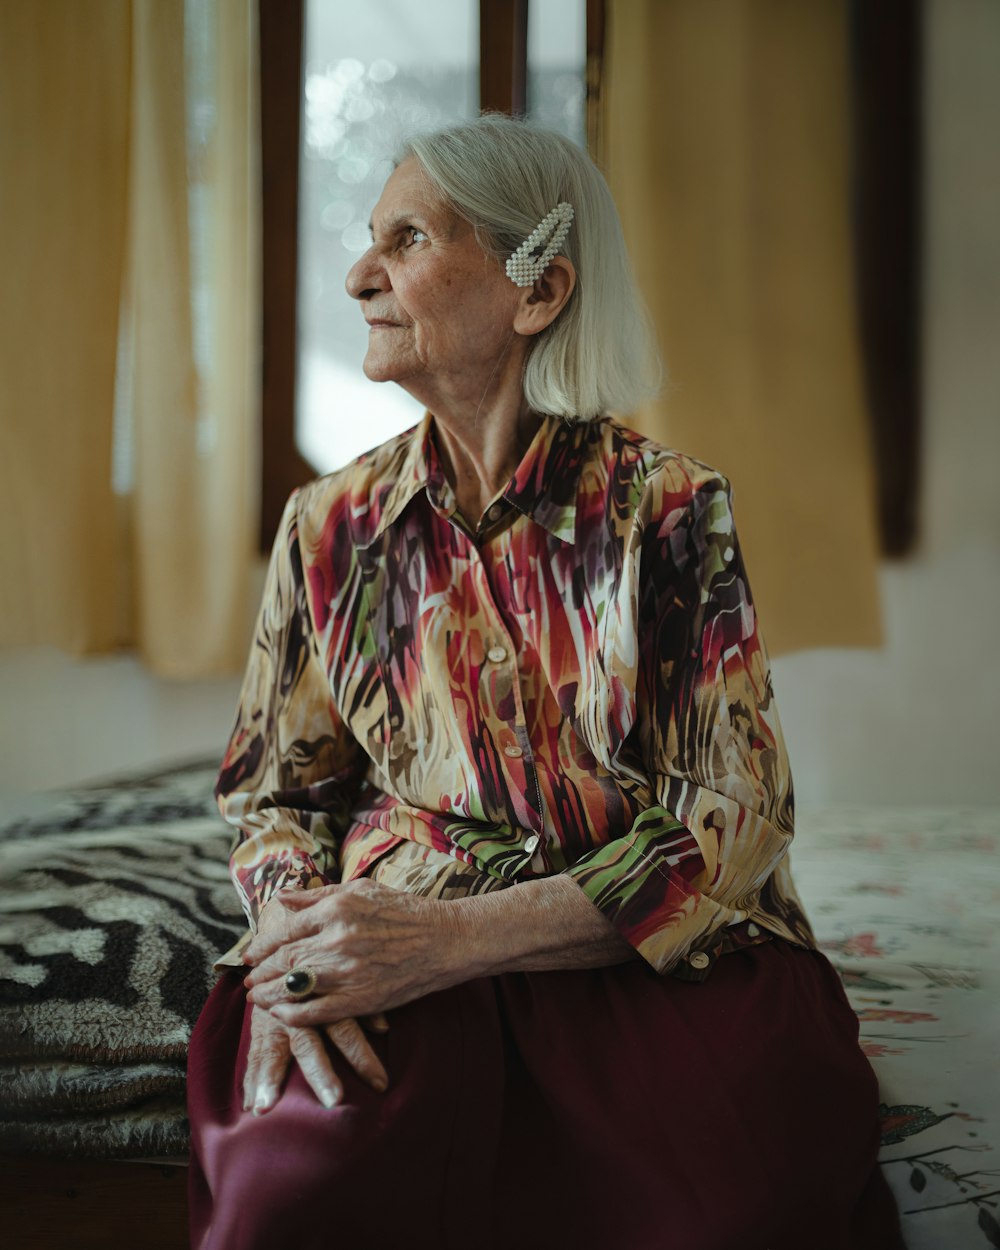 an older woman sitting on a bed in a room